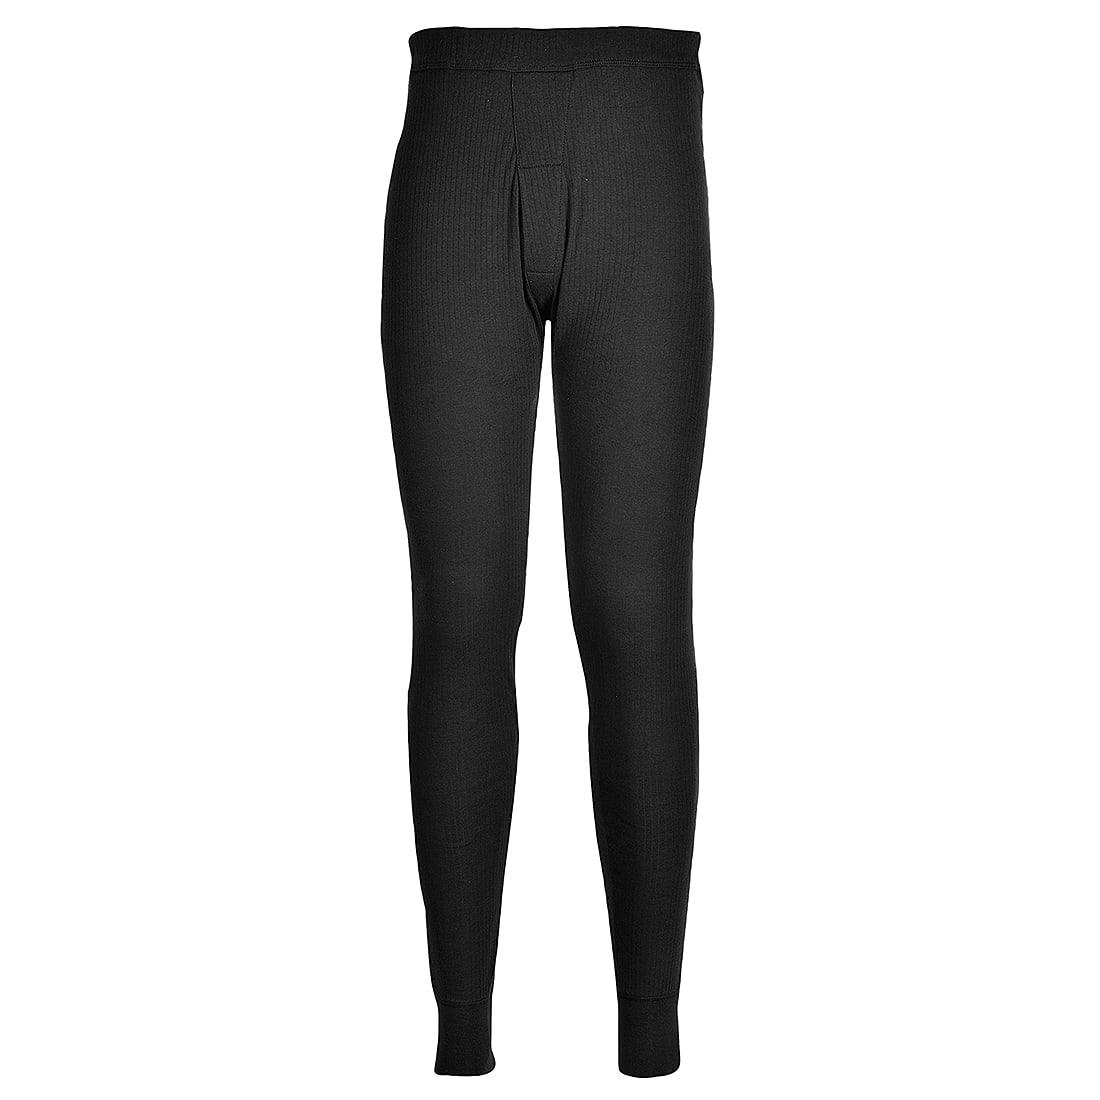 Portwest Thermal Trousers in Black (Product Code: B121)